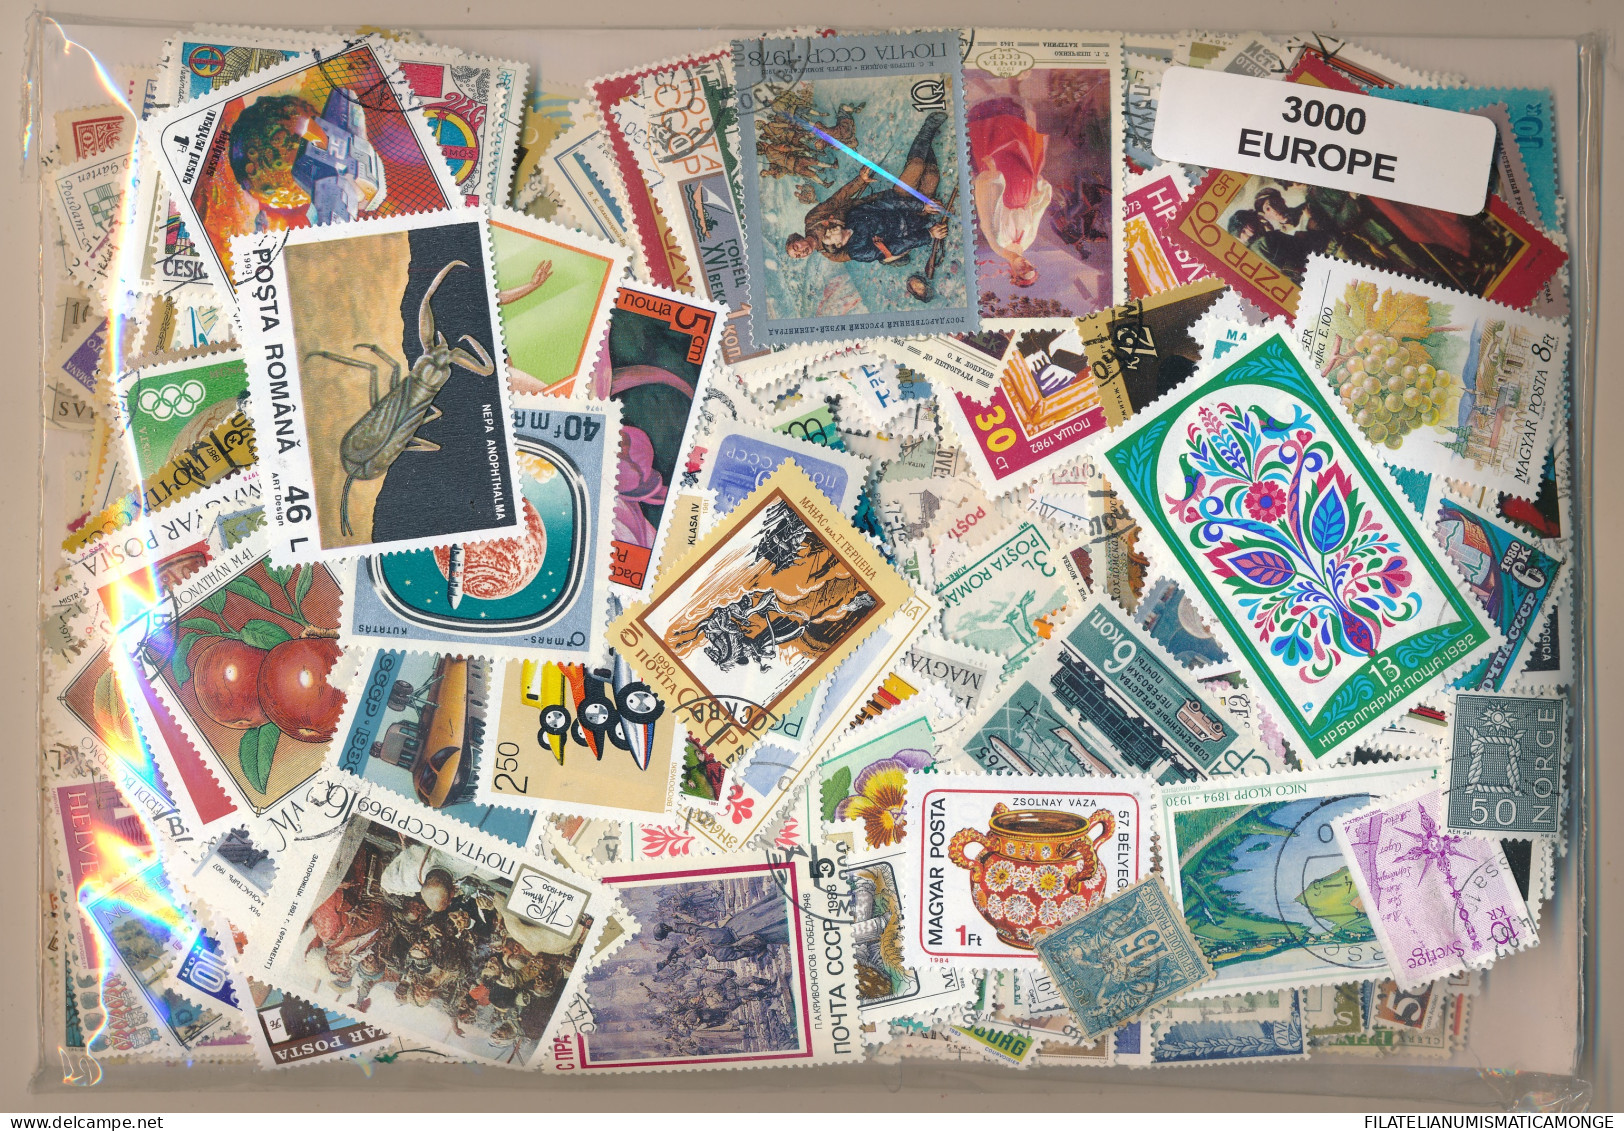  Offer - Lot Stamps - Paqueteria  Paises Europeos 3000 Sellos Diferentes        - Lots & Kiloware (mixtures) - Min. 1000 Stamps